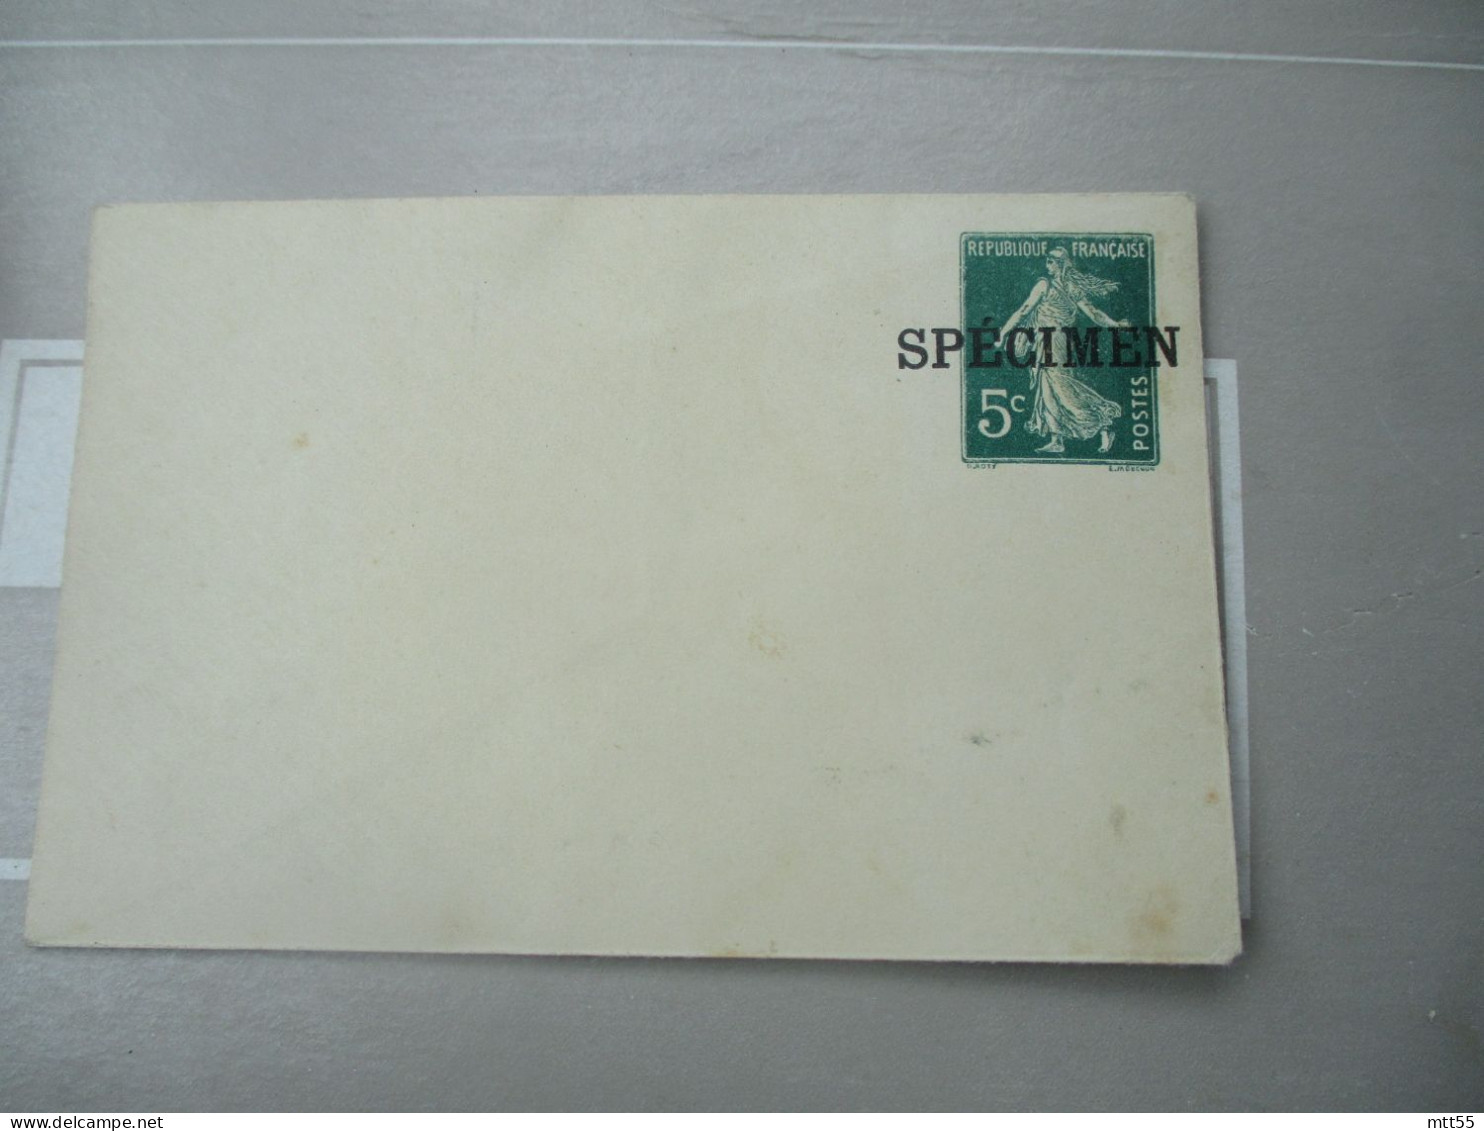 SPECIMEN SURCHARGE ENTIER POSTALE ENVELOPPE SEMEUSE 5 C - Standard Covers & Stamped On Demand (before 1995)